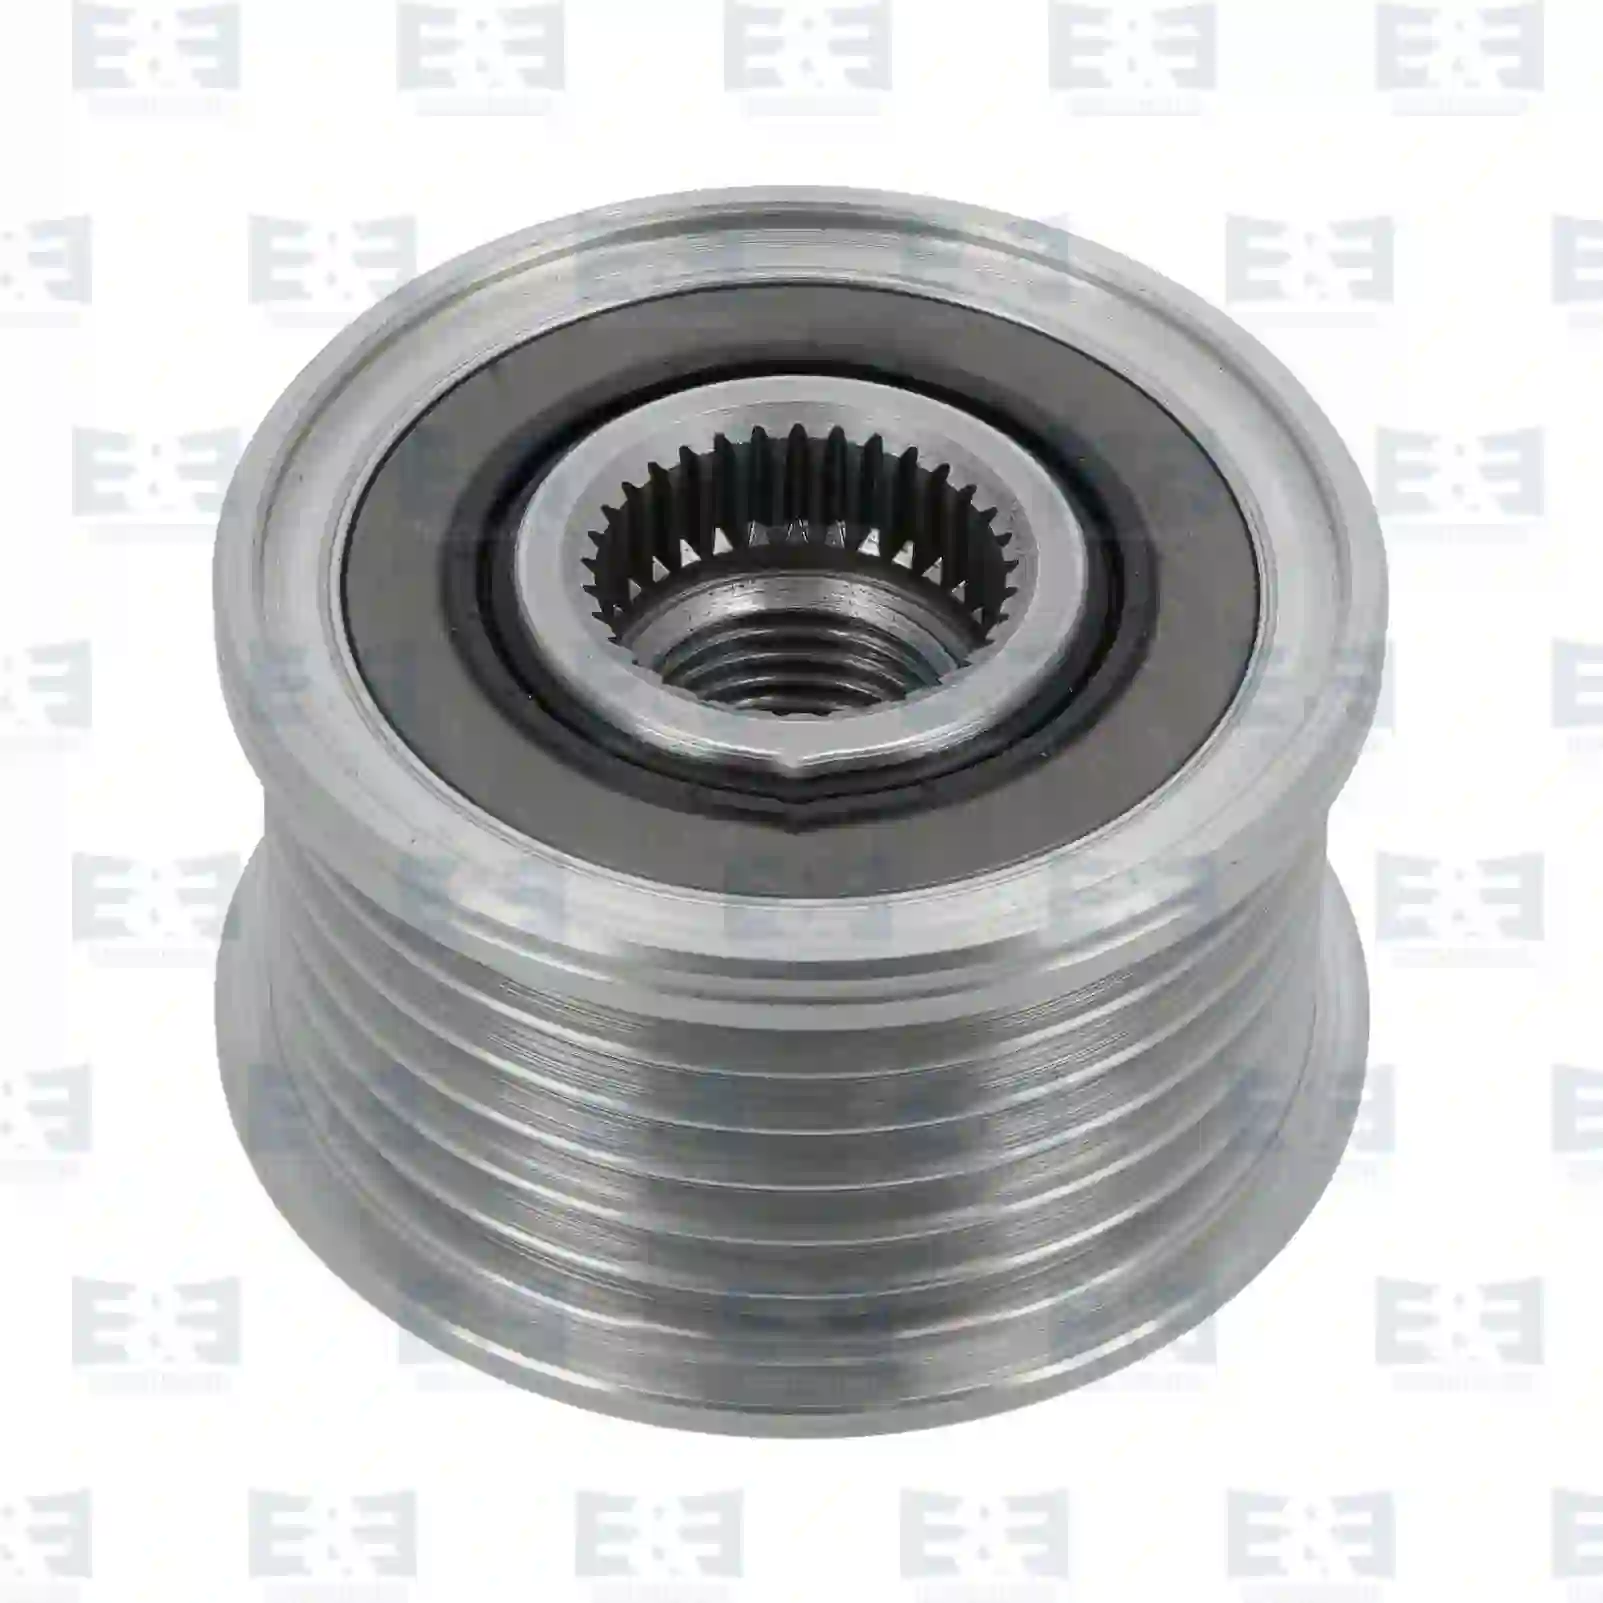 Pulley, Alternator Pulley, EE No 2E2290095 ,  oem no:12317536960, 12317550001, 12317570152, 335311, 335331, 353071, 3531, 0001500550, 0001500650, 0001501750, 0001502550, 6111500360, 6111501650, 6111550015, 6111550415, S30638577, 231000018R, 231000186R, 231000543R, 31251074, 3602231, 8251635, 8251644, 8251647, 8251648 E&E Truck Spare Parts | Truck Spare Parts, Auotomotive Spare Parts